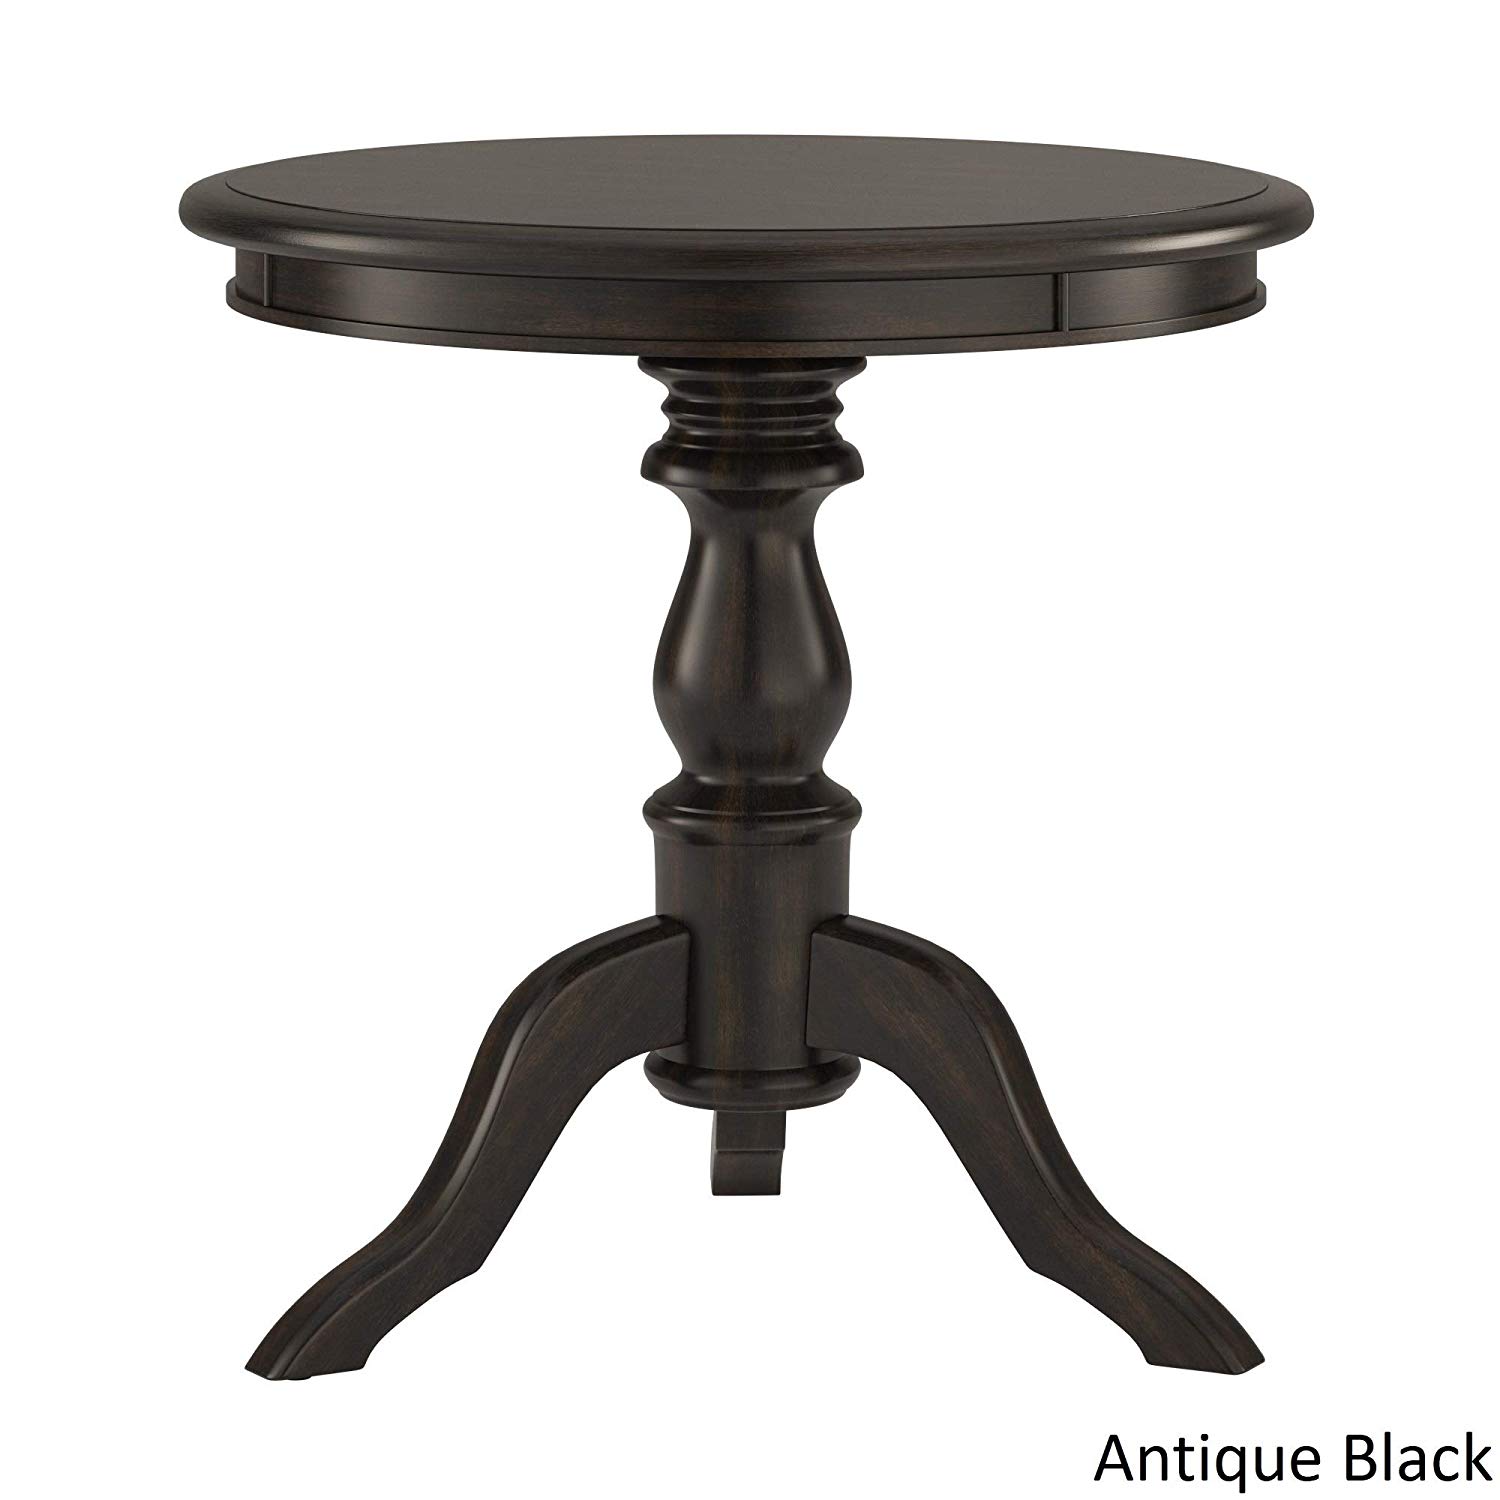 beckett antique wood pedestal accent table inspire black classic kitchen dining target standing lamp coastal bedroom ideas round outdoor furniture with wicker drawers teak end